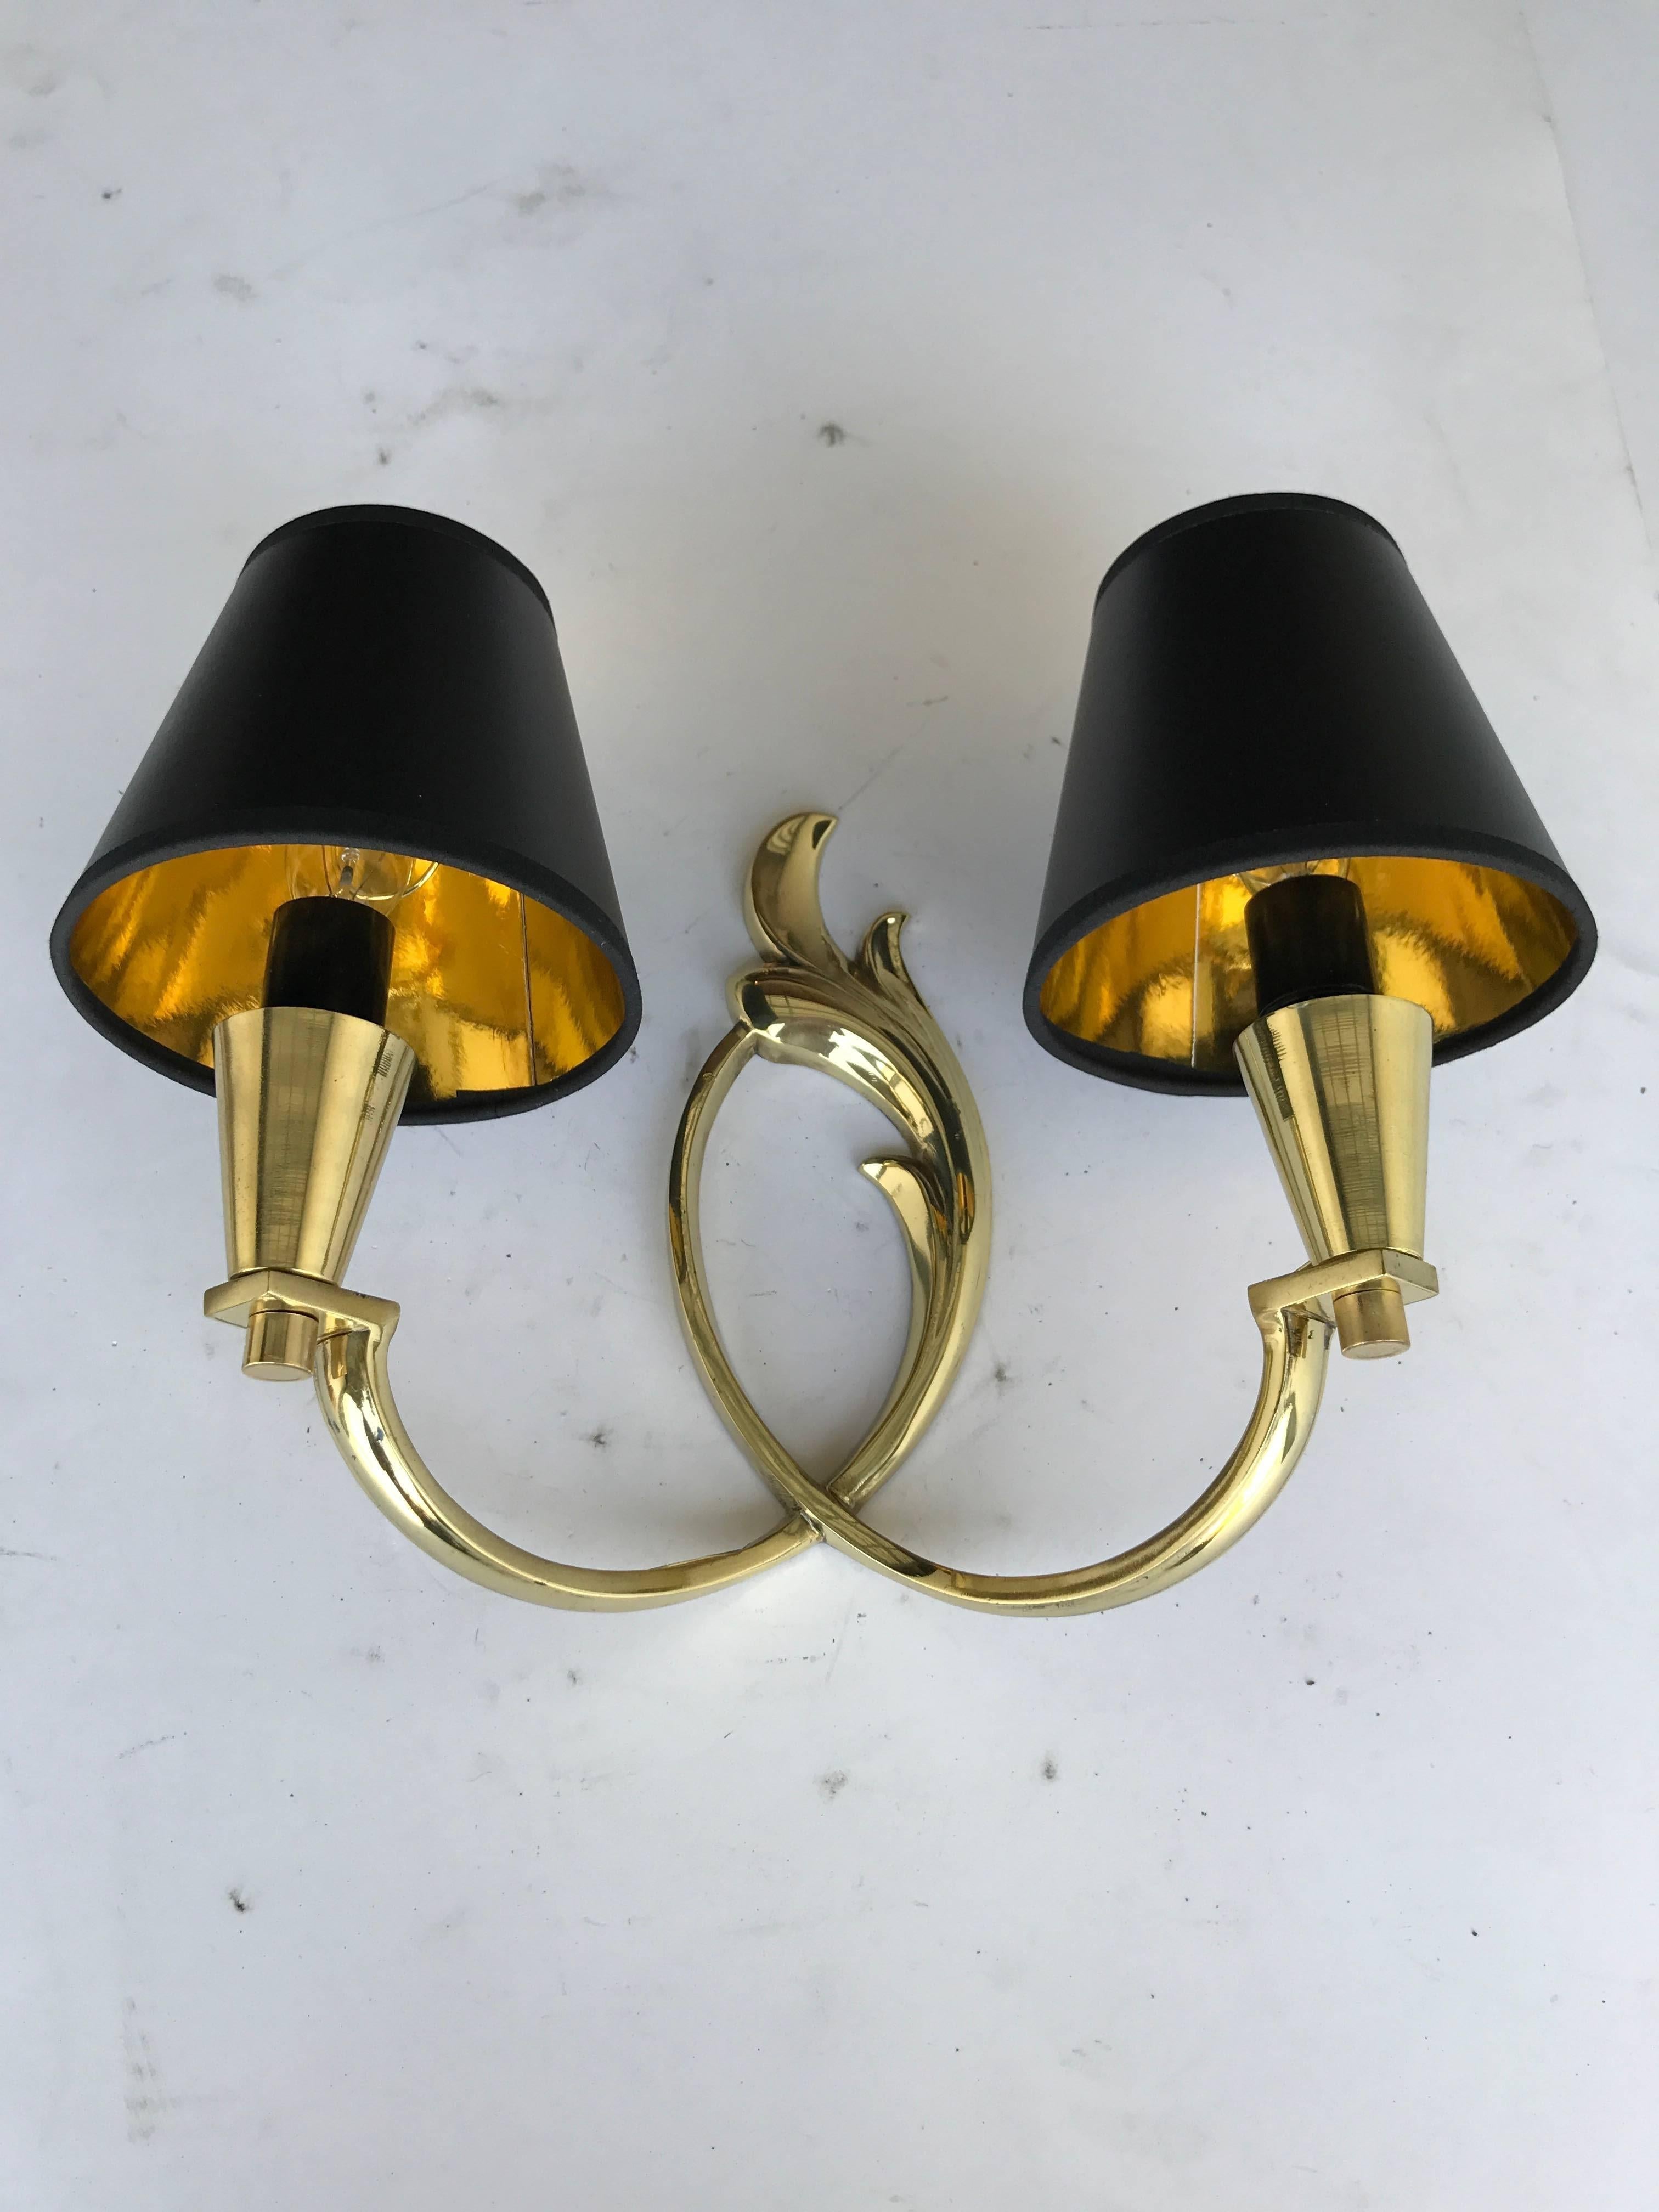 Superb pair of Riccardo Scarpa bronze sconces
2 lights , 60 watts max per bulb.
US rewired and in Working condition.
Custom backplate available.